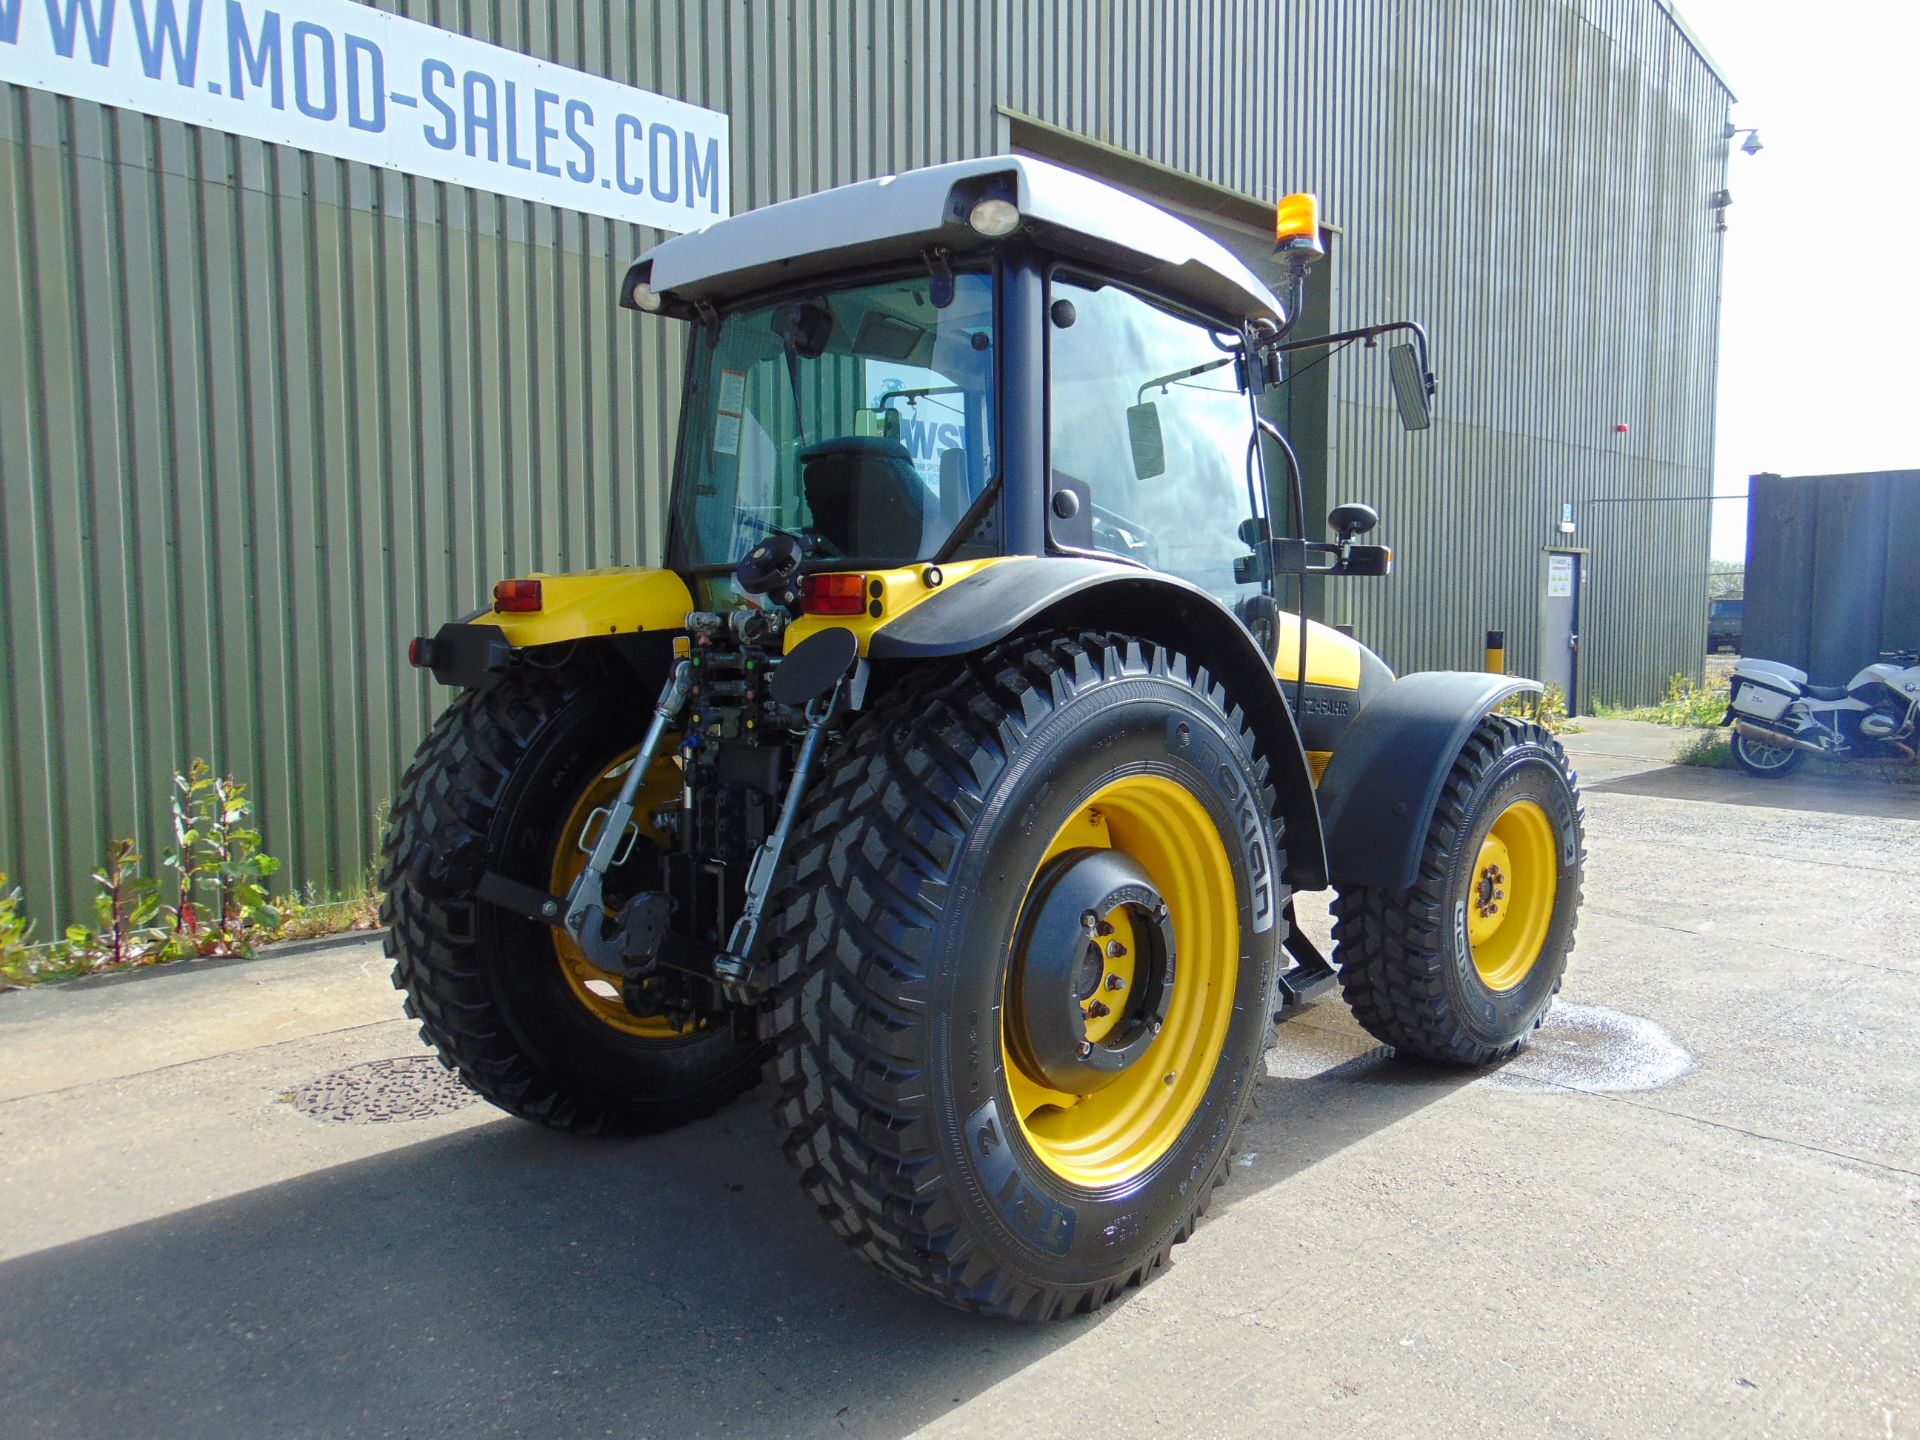 2010 Deutz-Fahr Agrofarm 420 - 4WD 97HP Agricultural Tractor 967 hrs only From MOD - Image 8 of 56